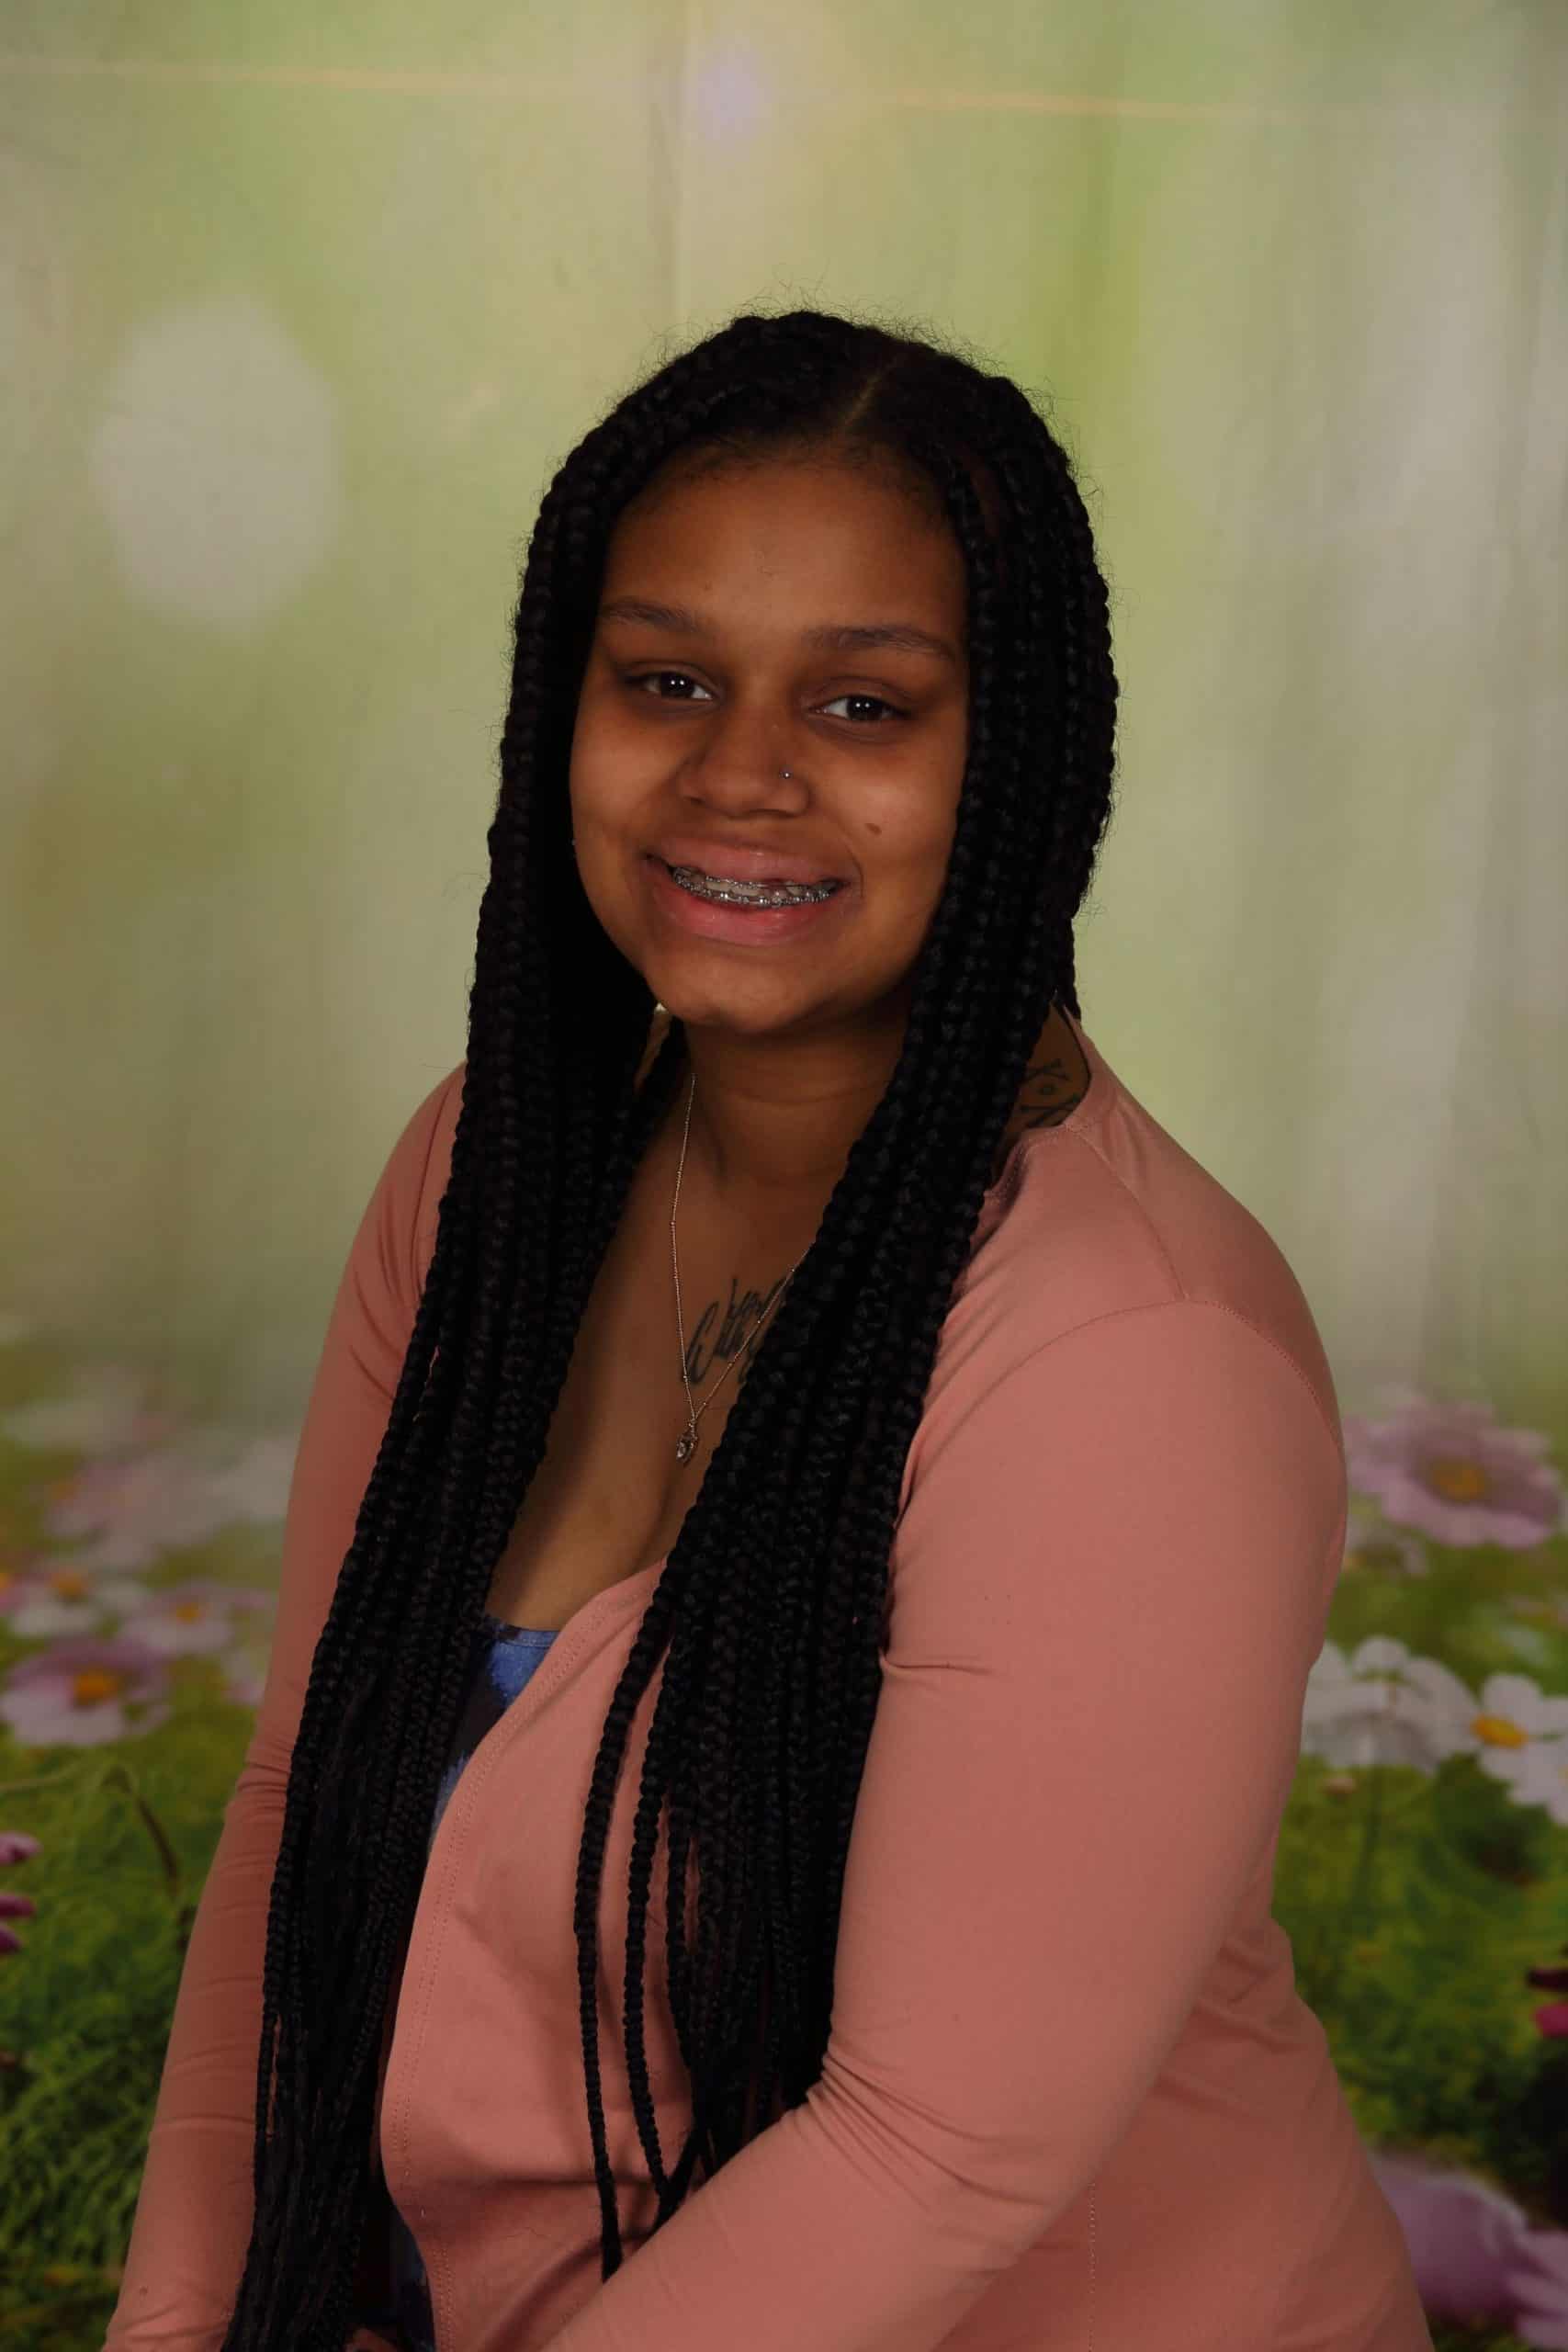 Photo of Co-Teacher Jaida Pro. She is a a young African-American woman with long hair. She is smiling and wears a pink sweater.